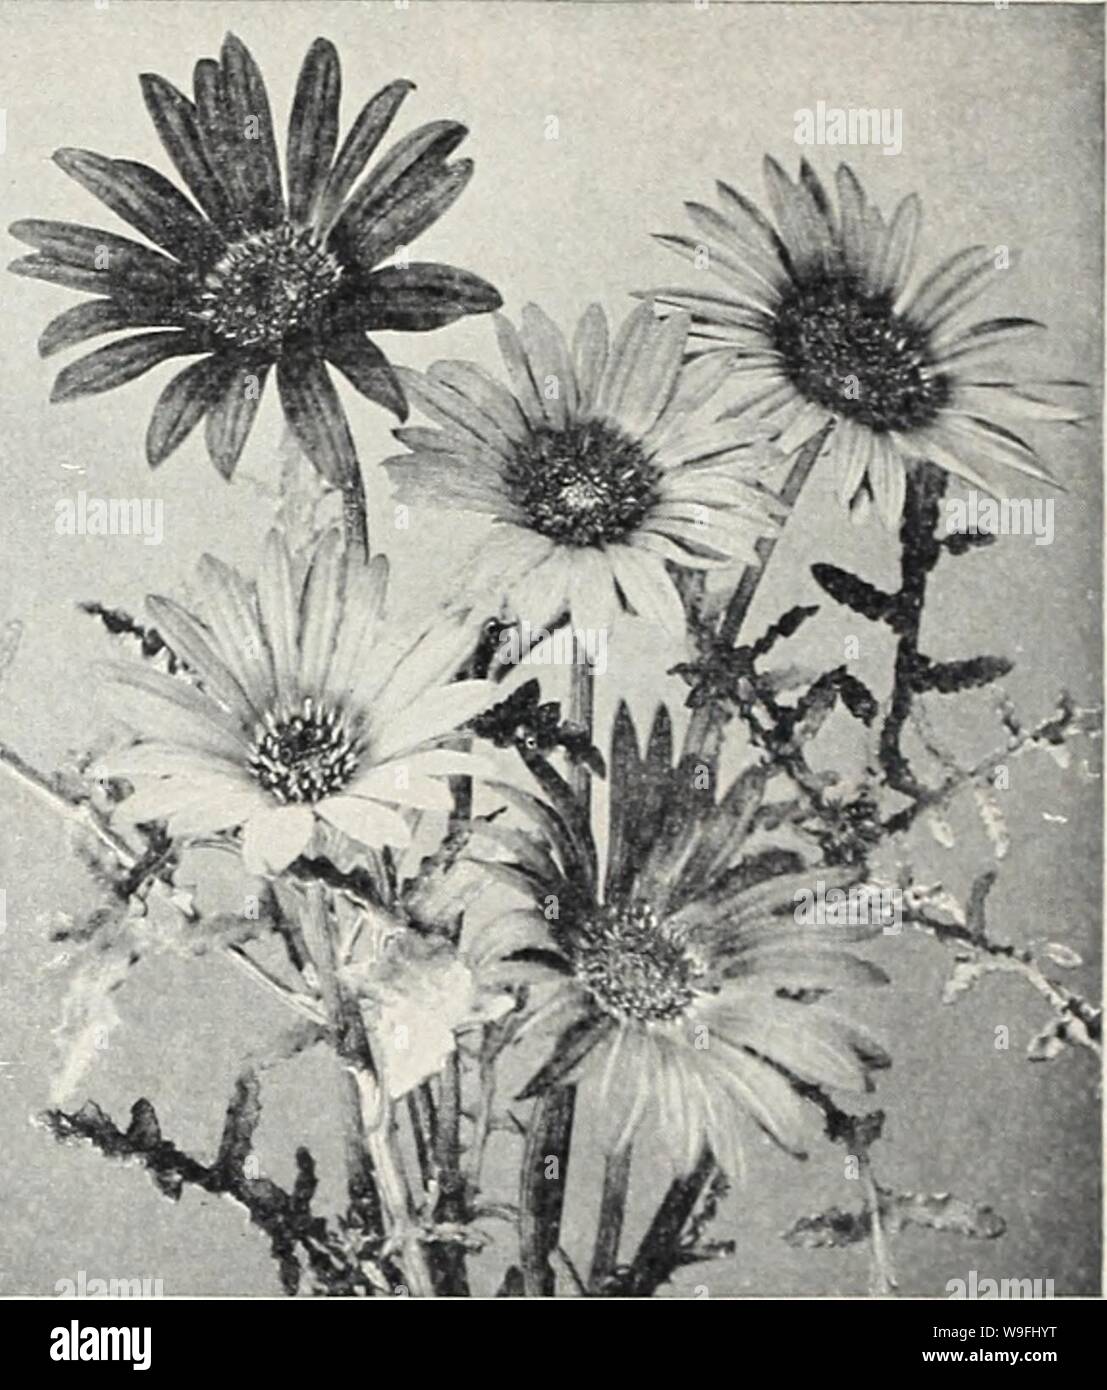 Archive image from page 45 of Currie's 65th year garden annual. Currie's 65th year garden annual  curries65thyearg19curr Year: 1940 ( Arctotis Hybrids Anchusa A AMARANTHUS Hardy annuals with strikingly beautiful flowers. Thrive best in a hot, sunny place. CAUDATUS (Love Lies Bleed- ing)—Flowers borne in long, drooping sprays. Blood red. Pkt., 5c. TRICOLOR (Joseph's Coat) —2'/2 feet. The inner foliage is of the blackest bronze, tip- ped with green, while the outer foliaae is bright scarlet and gold. Pkt., 10c. MOLTEN FIRE (Summer Poinsettial —Very ornamen- tal and the most beautiful of all Amar Stock Photo